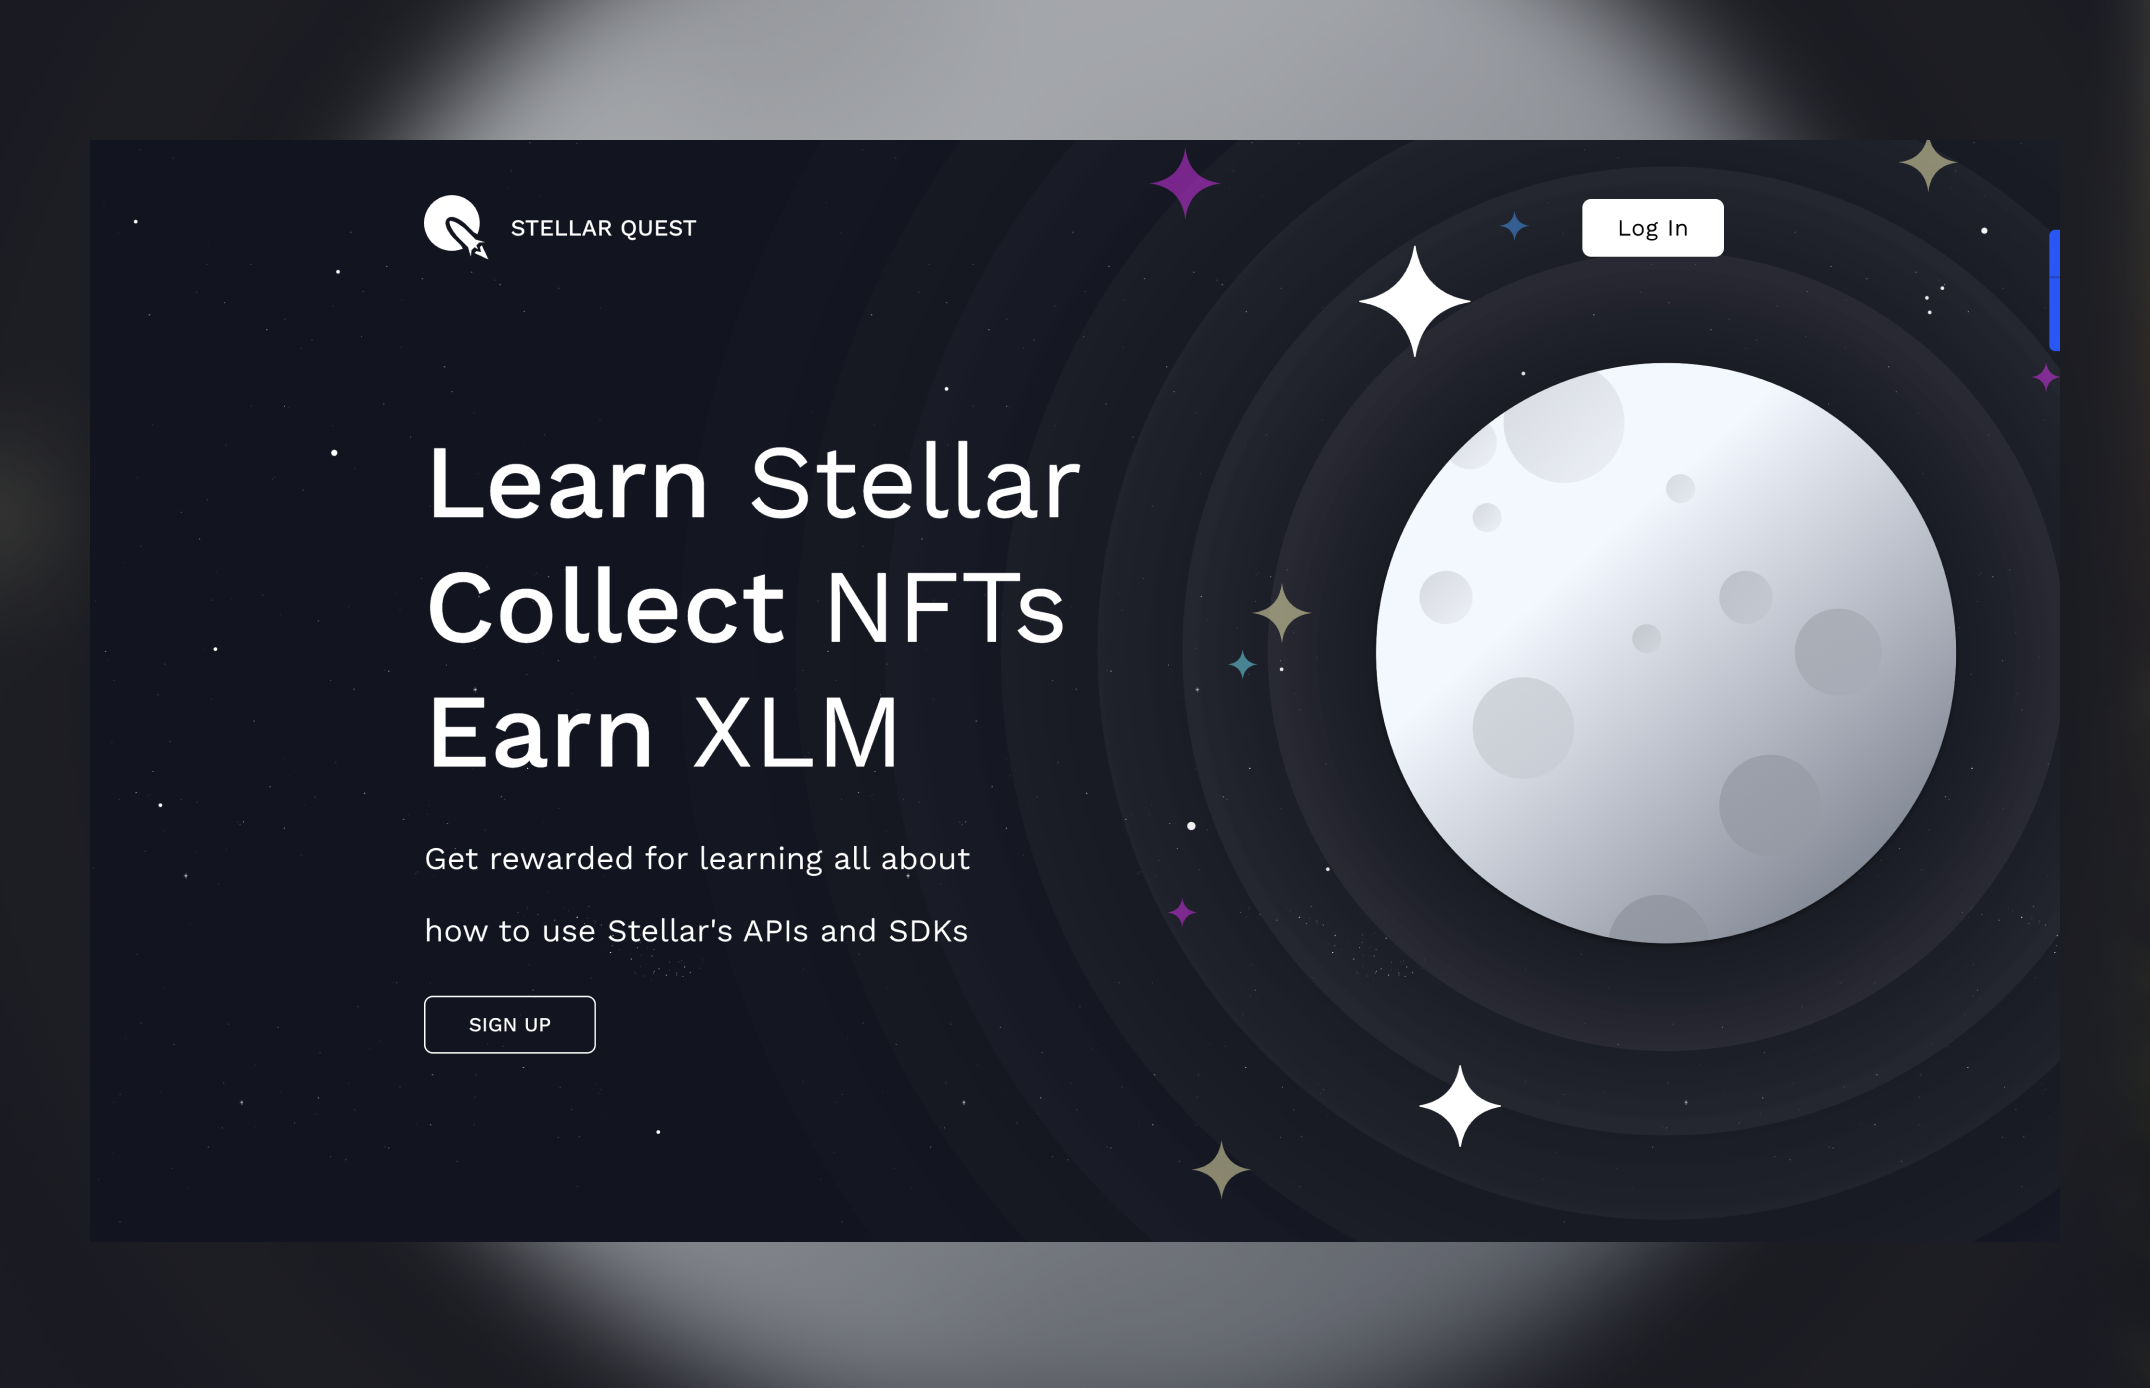 Screengrab of Stellar Quest website with graphic of a moon, and stars and text 'Learn Stellar Collect NFTs Earn XLM'.